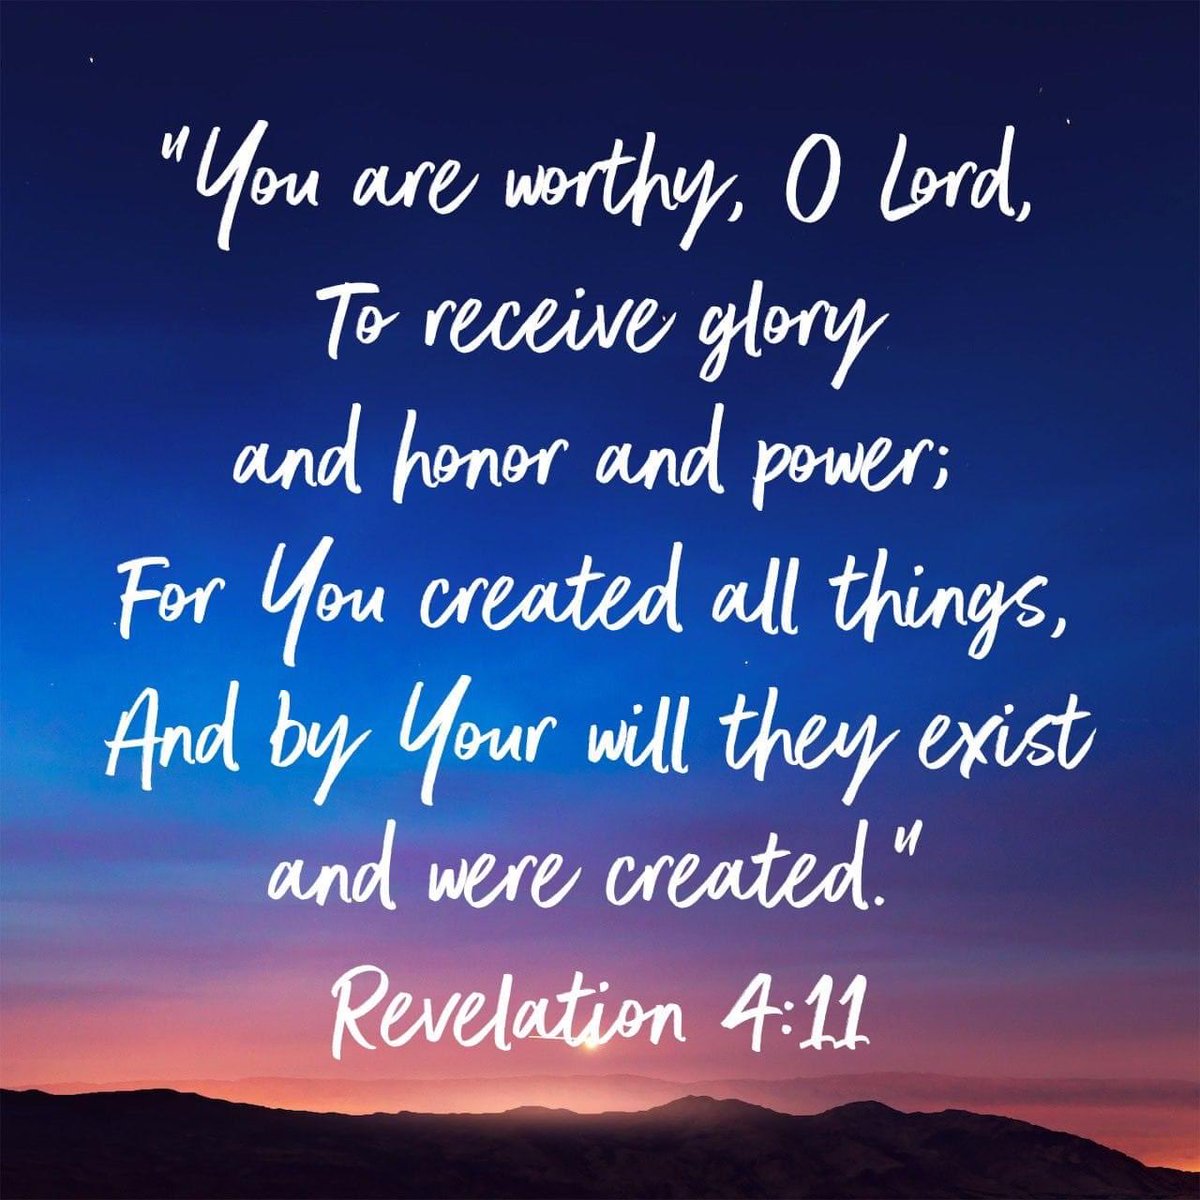 #POstables I hope you will take the time to give glory to the Lord who created everything including you! 😍